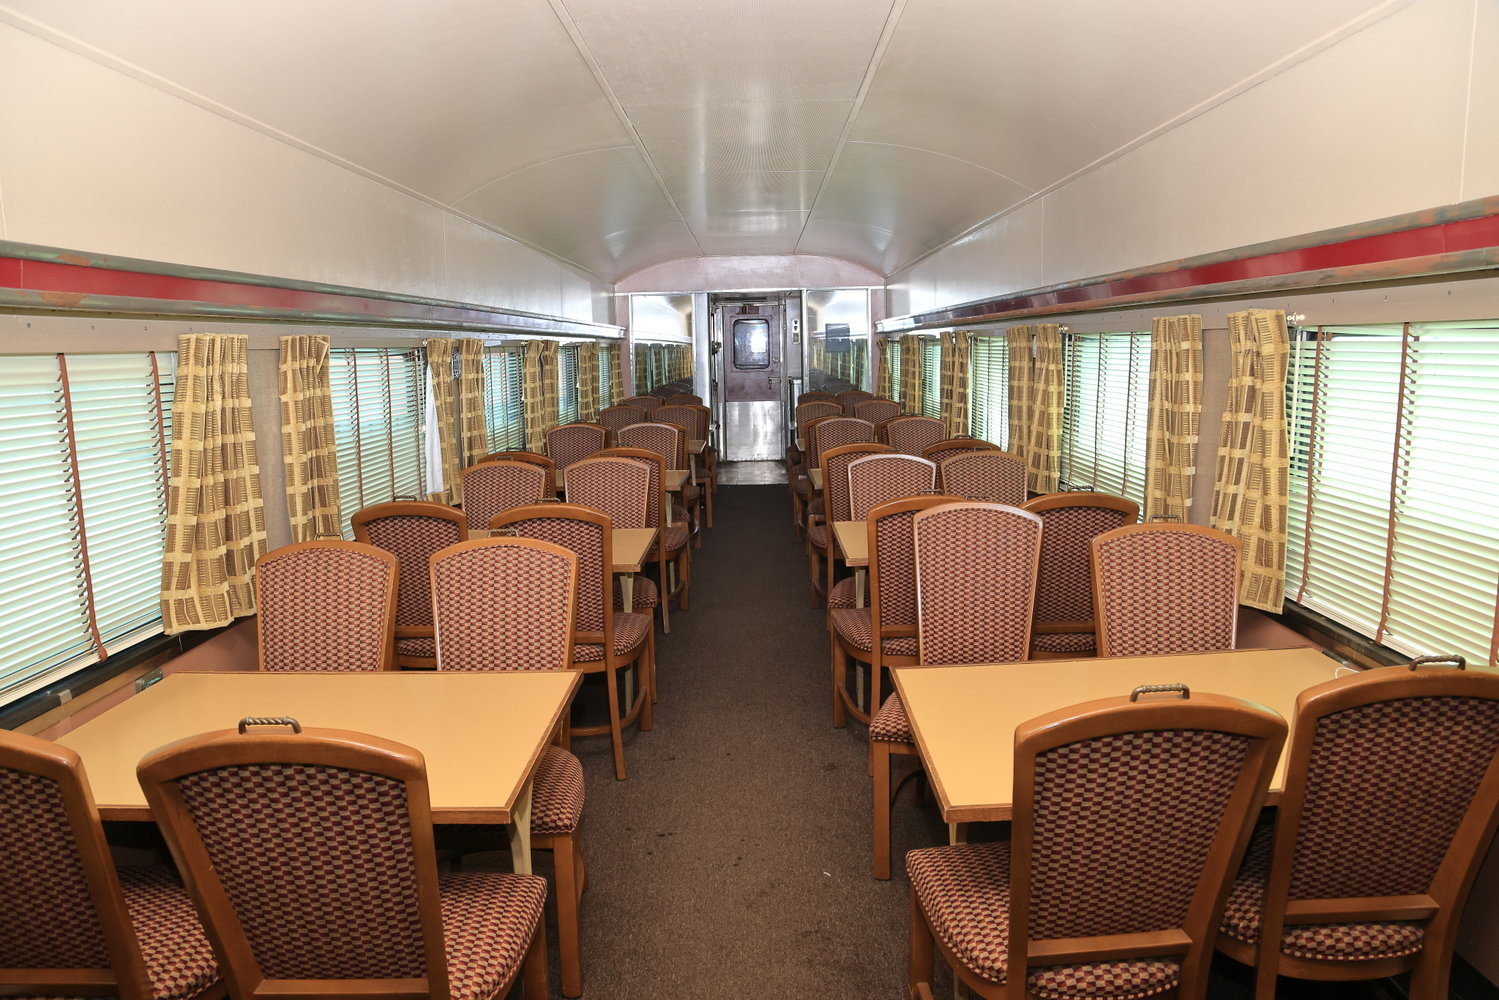 Pictured is the beautifully restored 48-seat dining area of dining car 469, originally built in 1949 for the Lackawanna Railroad. The exterior will be restored to its authentic Lackawanna appearance, thanks to a generous grant. It is used for stationary meal service on-site in Port..Jervis, as well as for off-site events like Operation Toy Train’s annual Toys for Tots collection train.